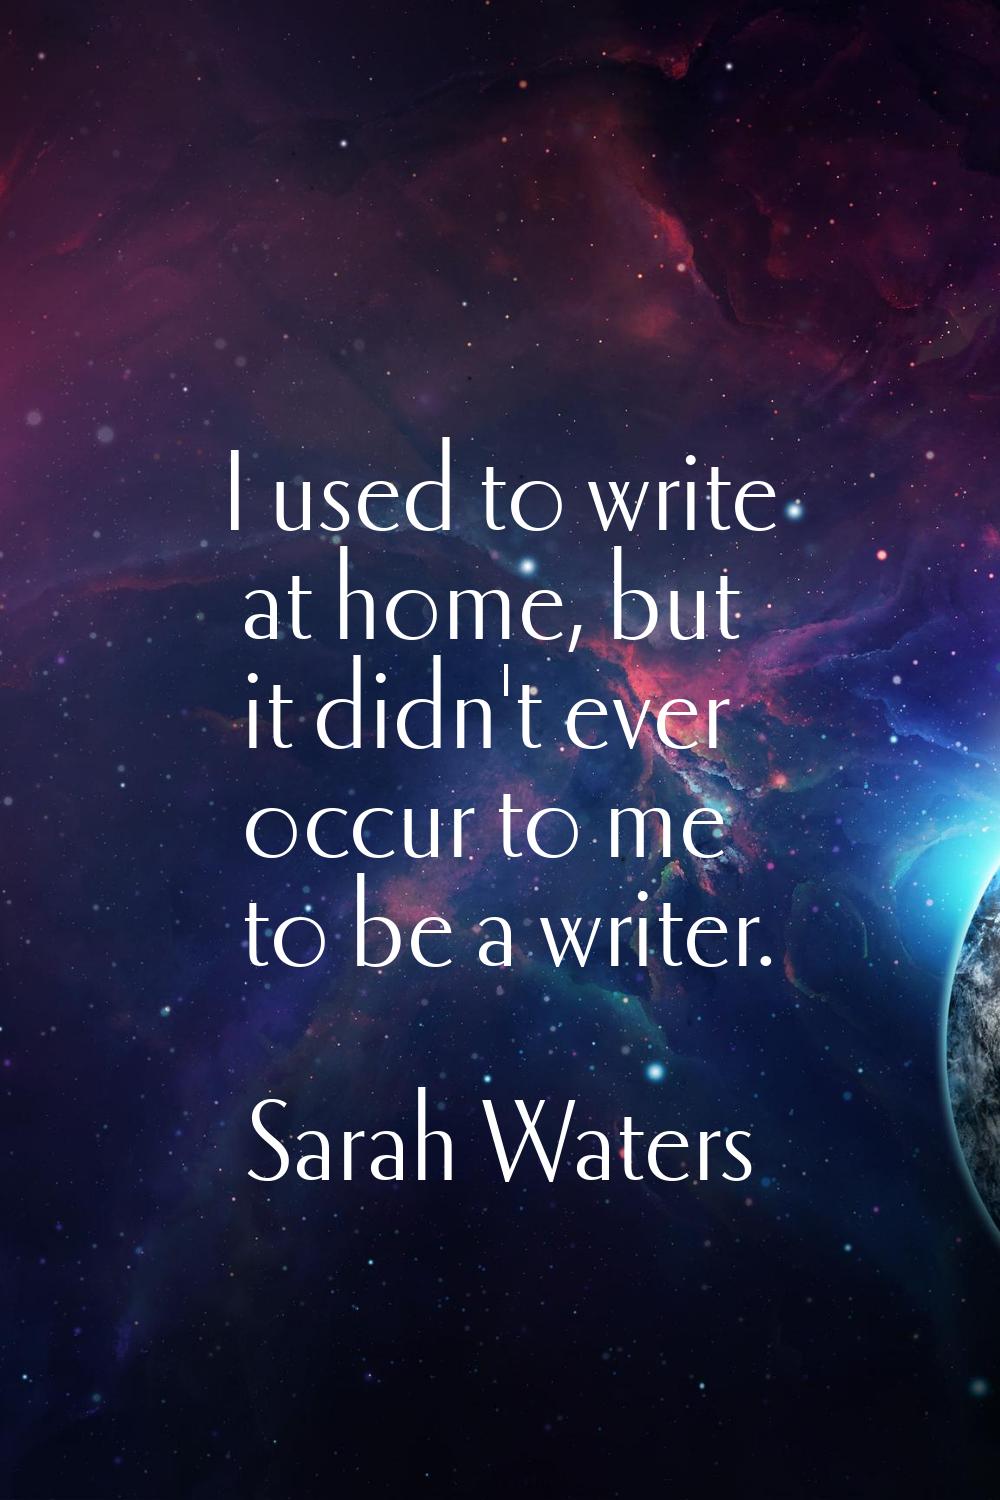 I used to write at home, but it didn't ever occur to me to be a writer.